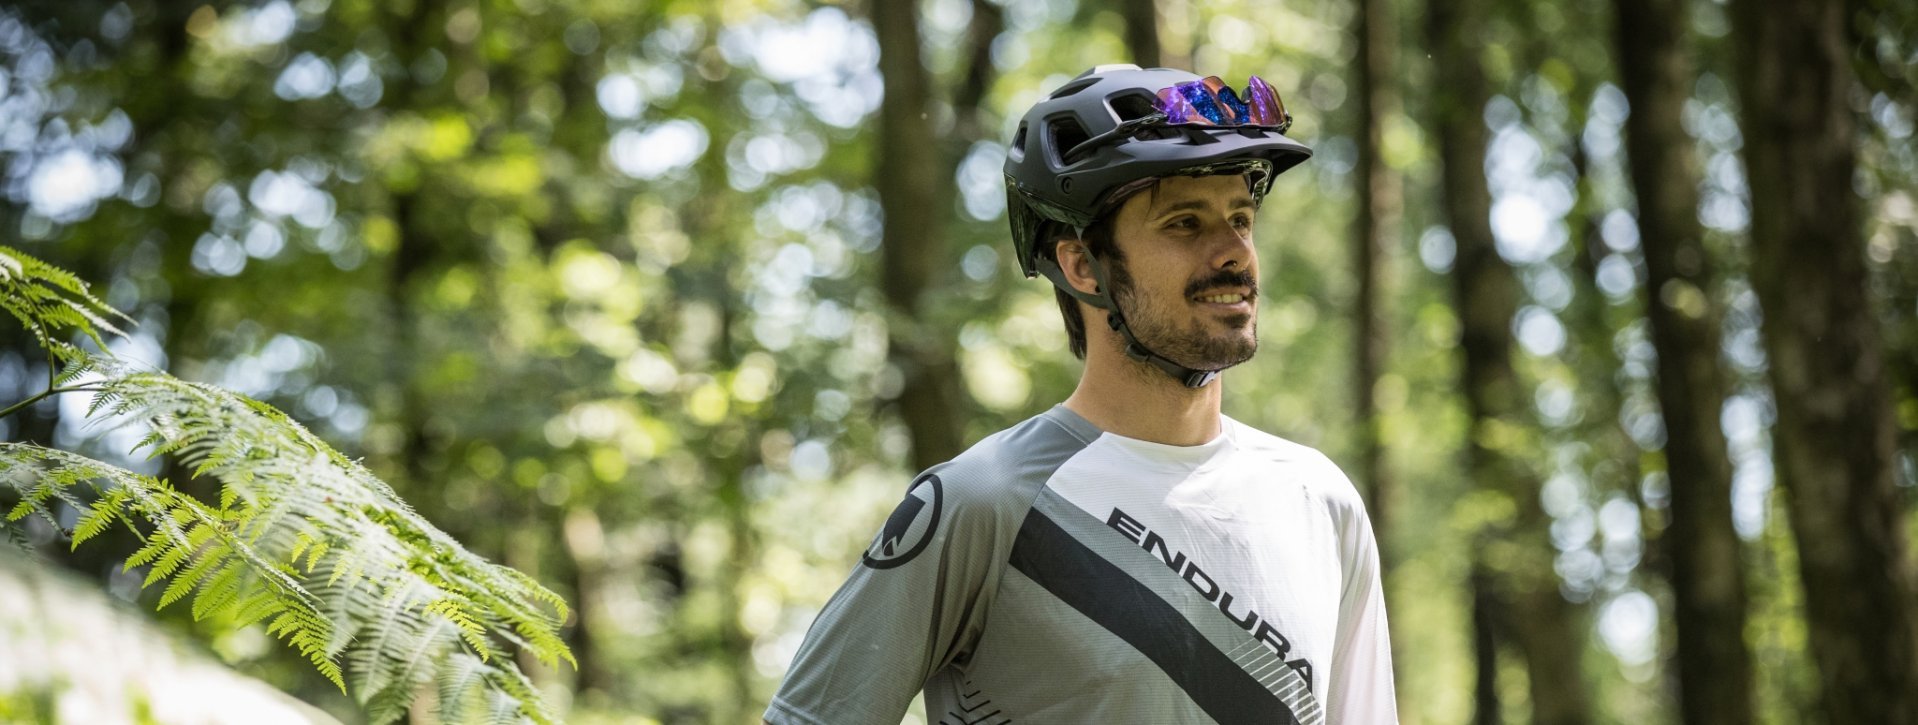 The Endura SingleTrack II helmet available at bike-components.de. It is lightweight, reliable and very safe all while being very breathable. Get yours today at a great price.